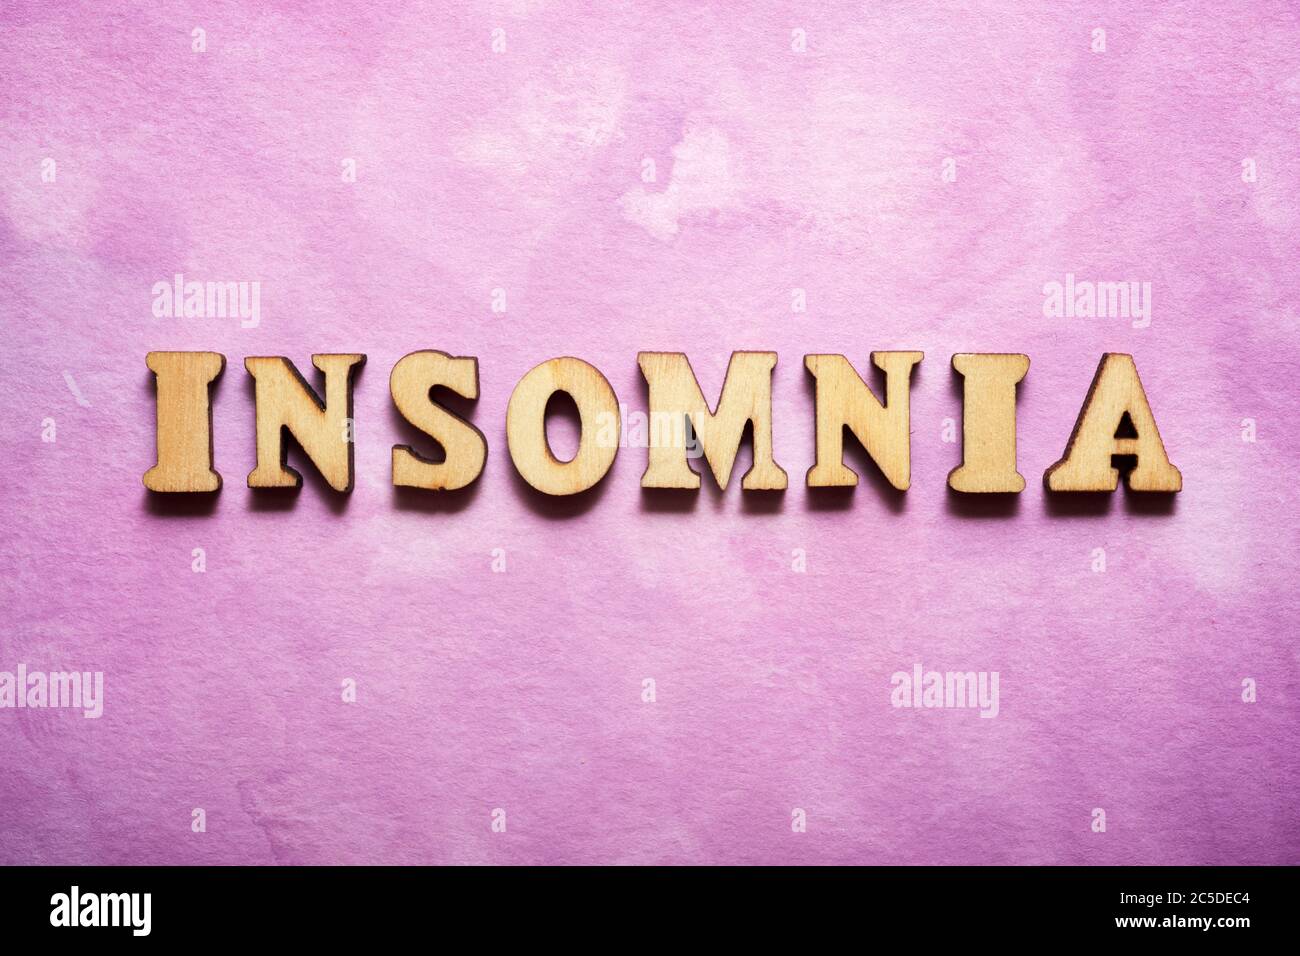 Insomnia text on a colored paper. Stock Photo